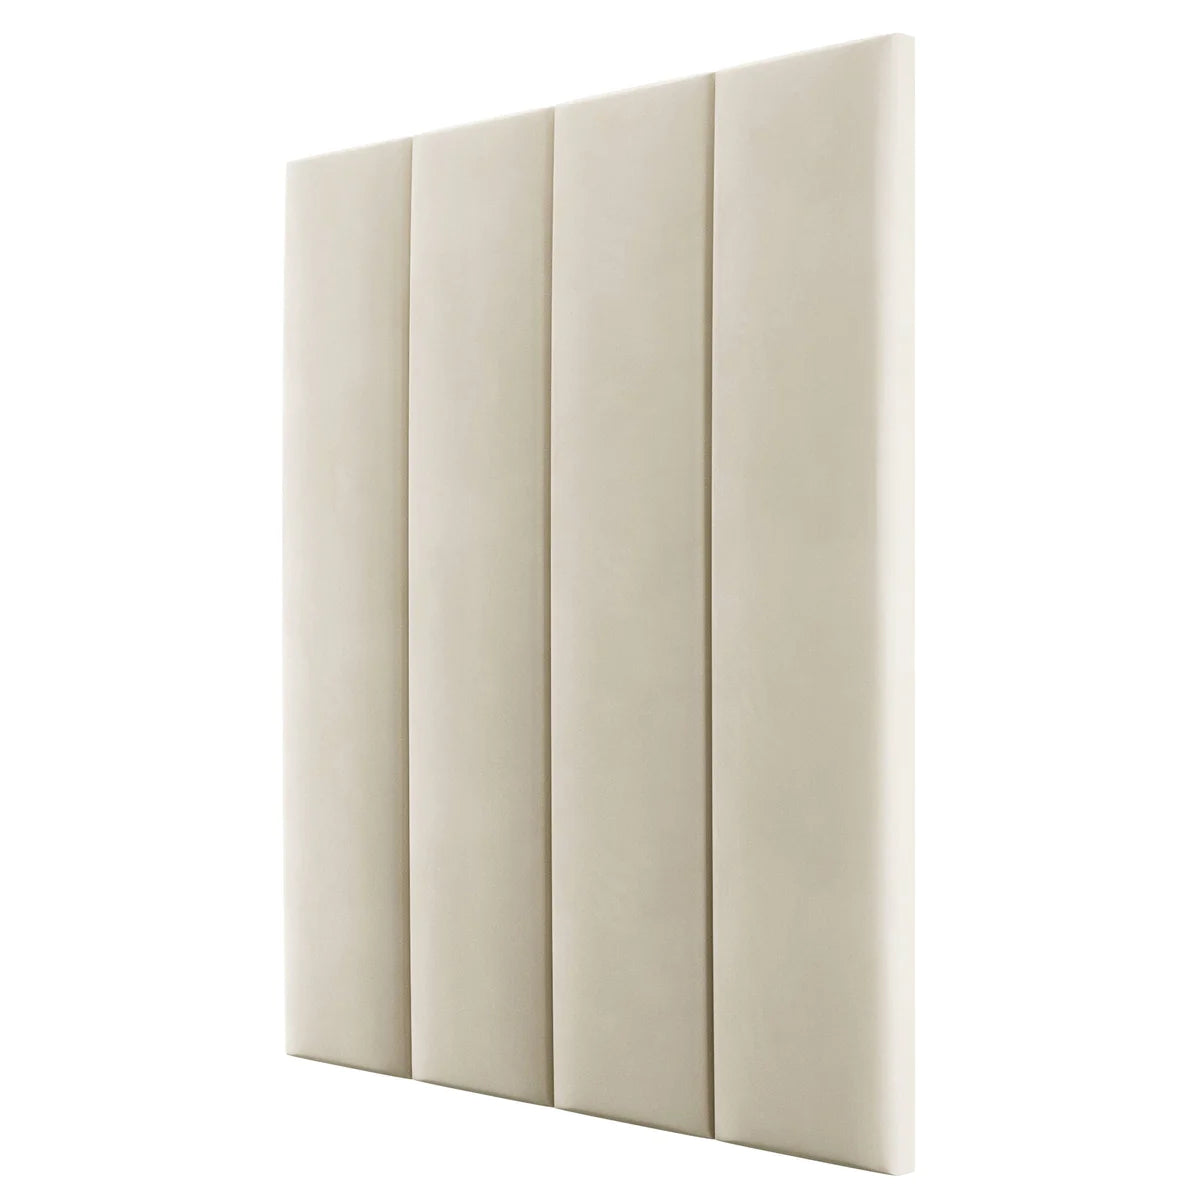 Soft Velvet Cream Upholstered Headboard Wall Panel with Individual Padding